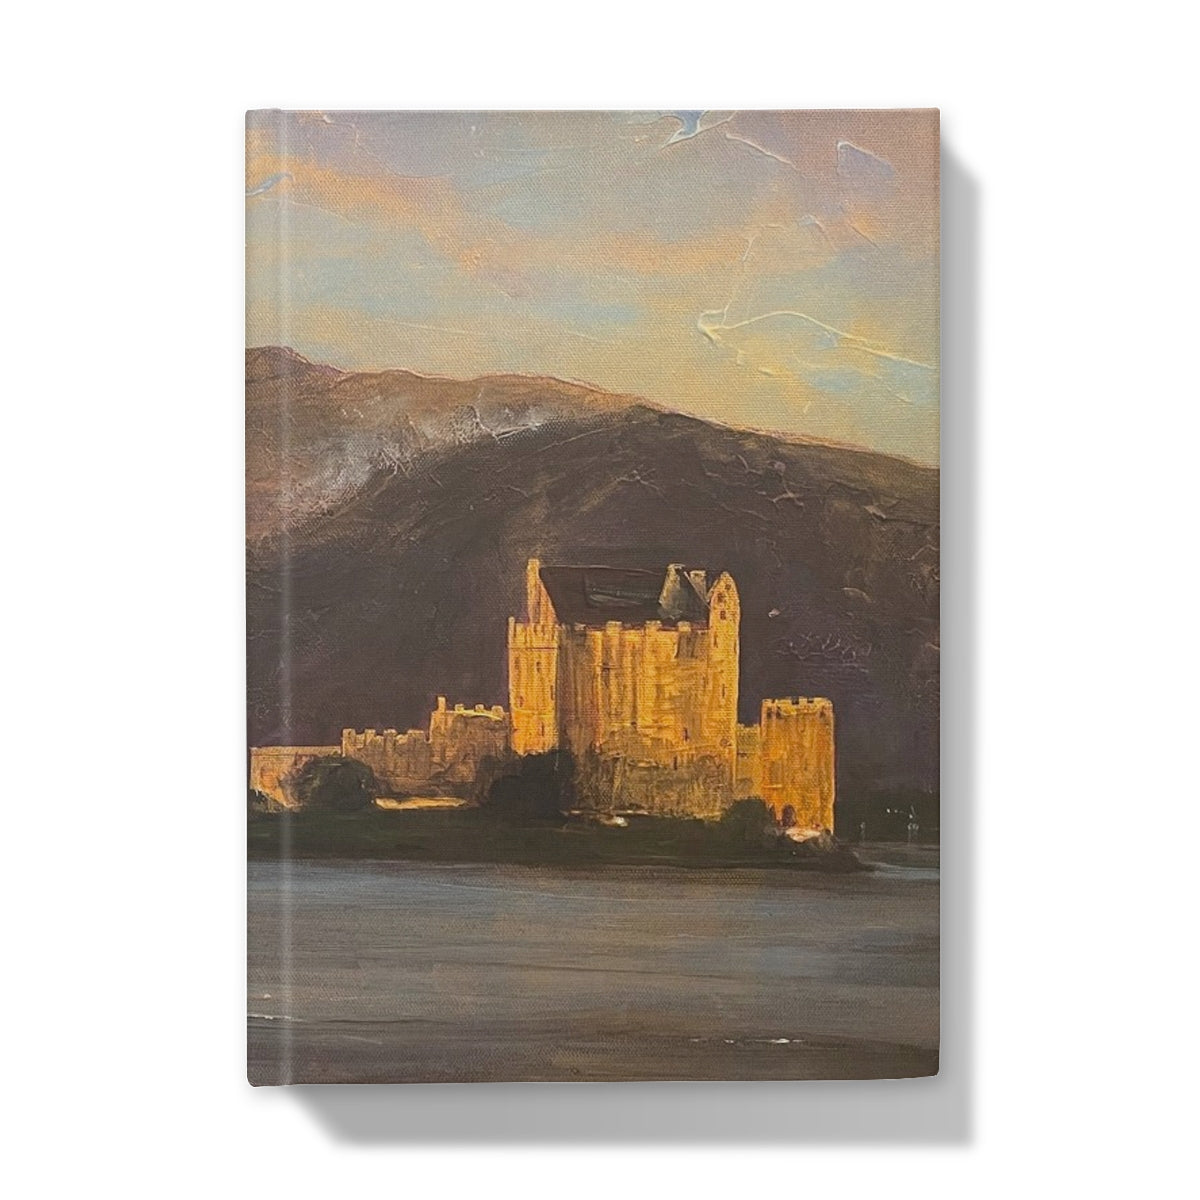 Eilean Donan Castle Art Gifts Hardback Journal-Journals & Notebooks-Historic & Iconic Scotland Art Gallery-5"x7"-Lined-Paintings, Prints, Homeware, Art Gifts From Scotland By Scottish Artist Kevin Hunter